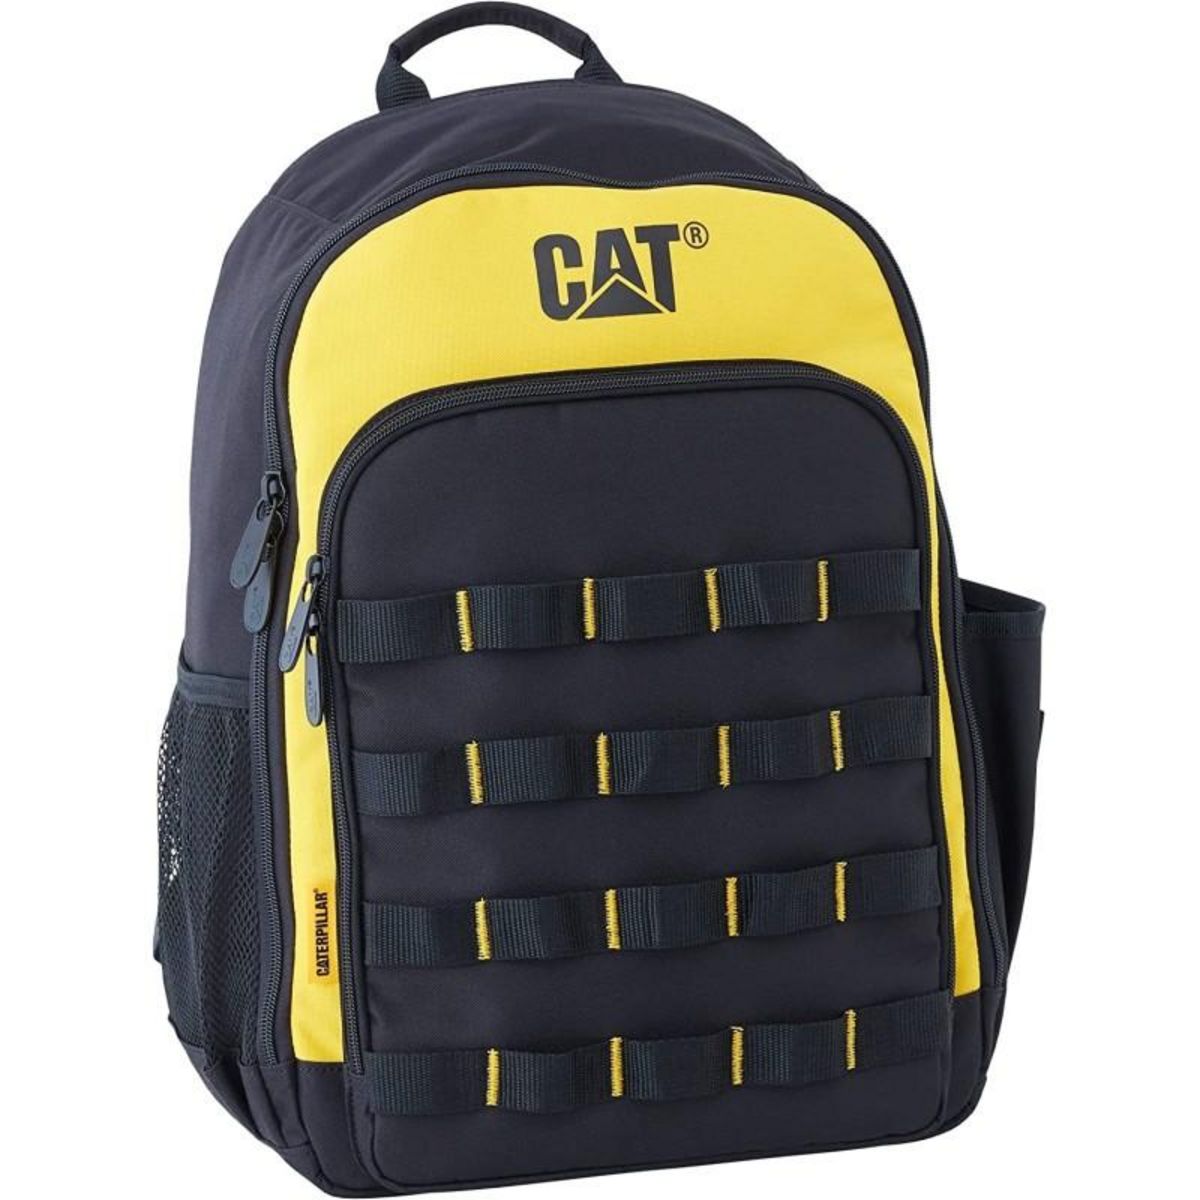 caterpillar Sac à dos 21L Caterpillar Polyvalent Toile polyester 3 + 19 poches